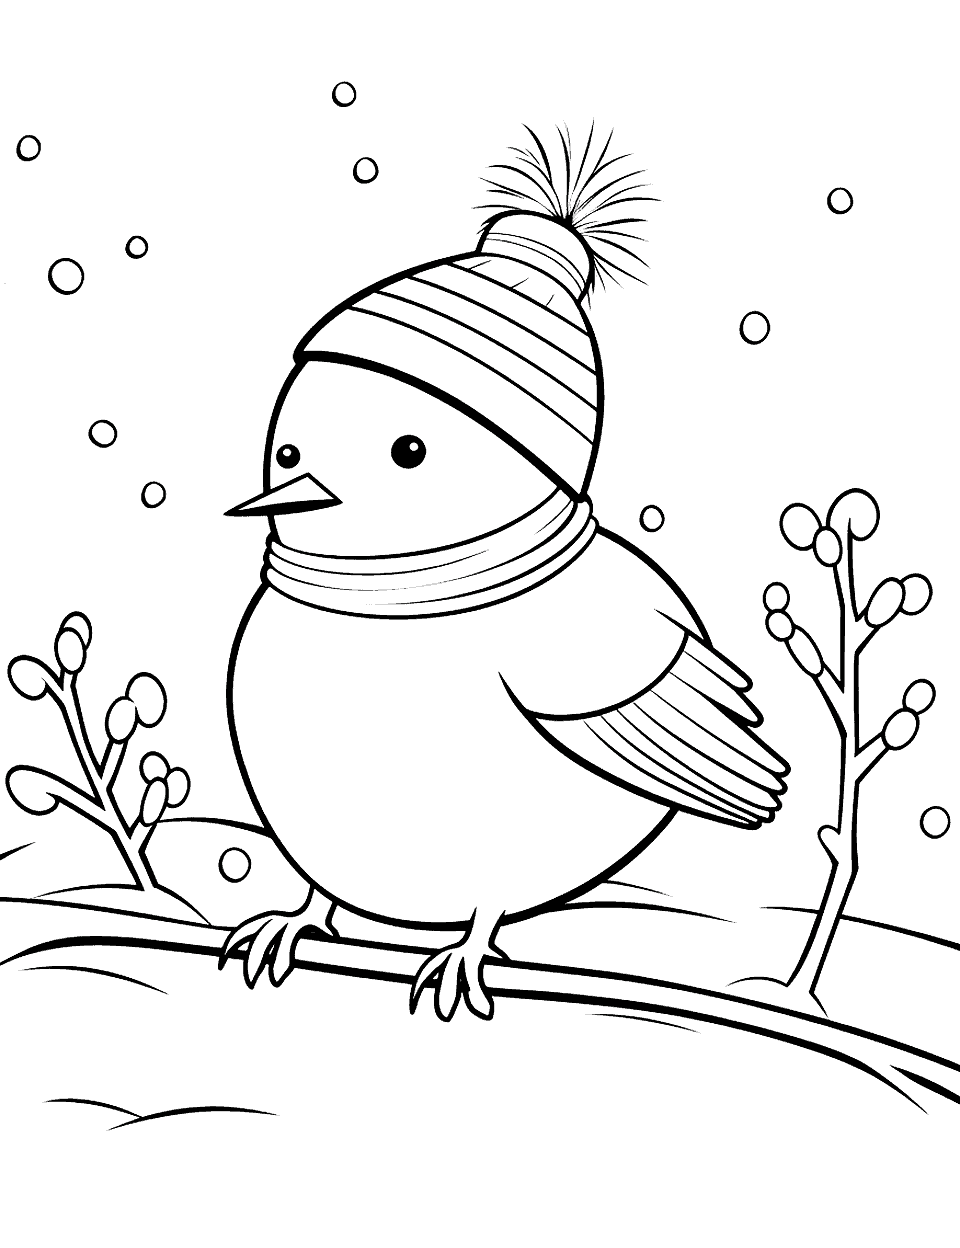 Winter coloring pages free printable sheets